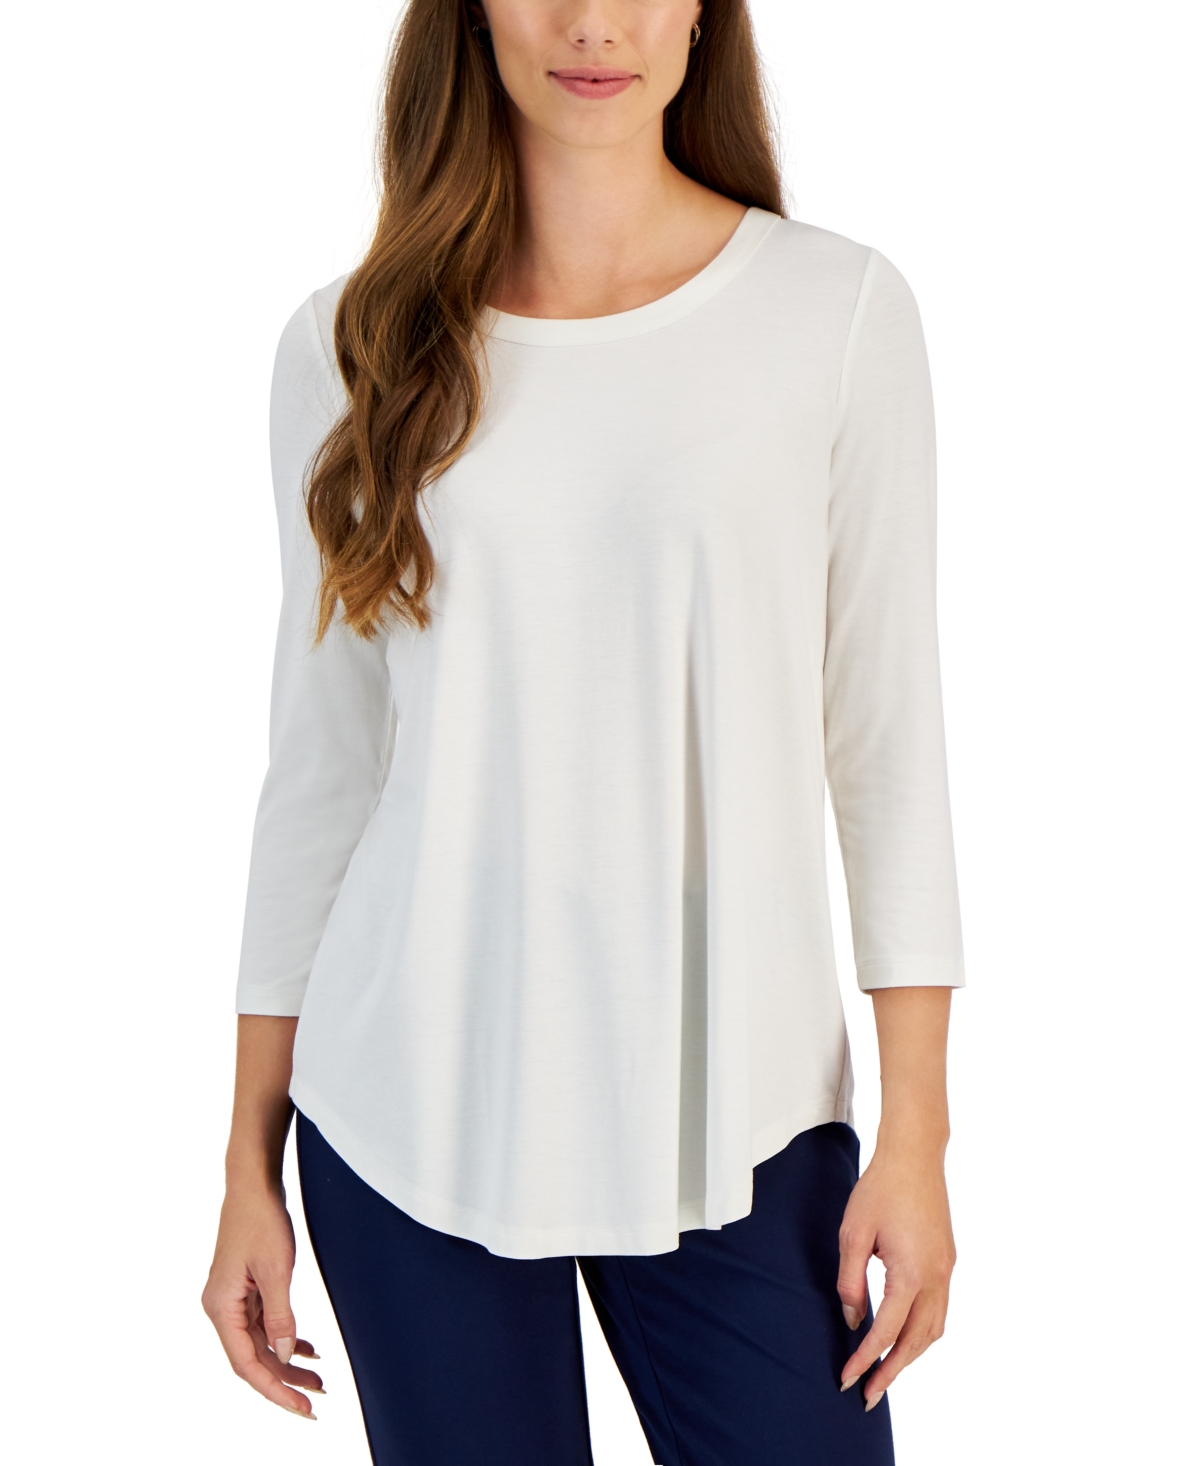 Women's Satin-Trim 3/4 Sleeve Knit Top, Created for Macy's - Neo Natural